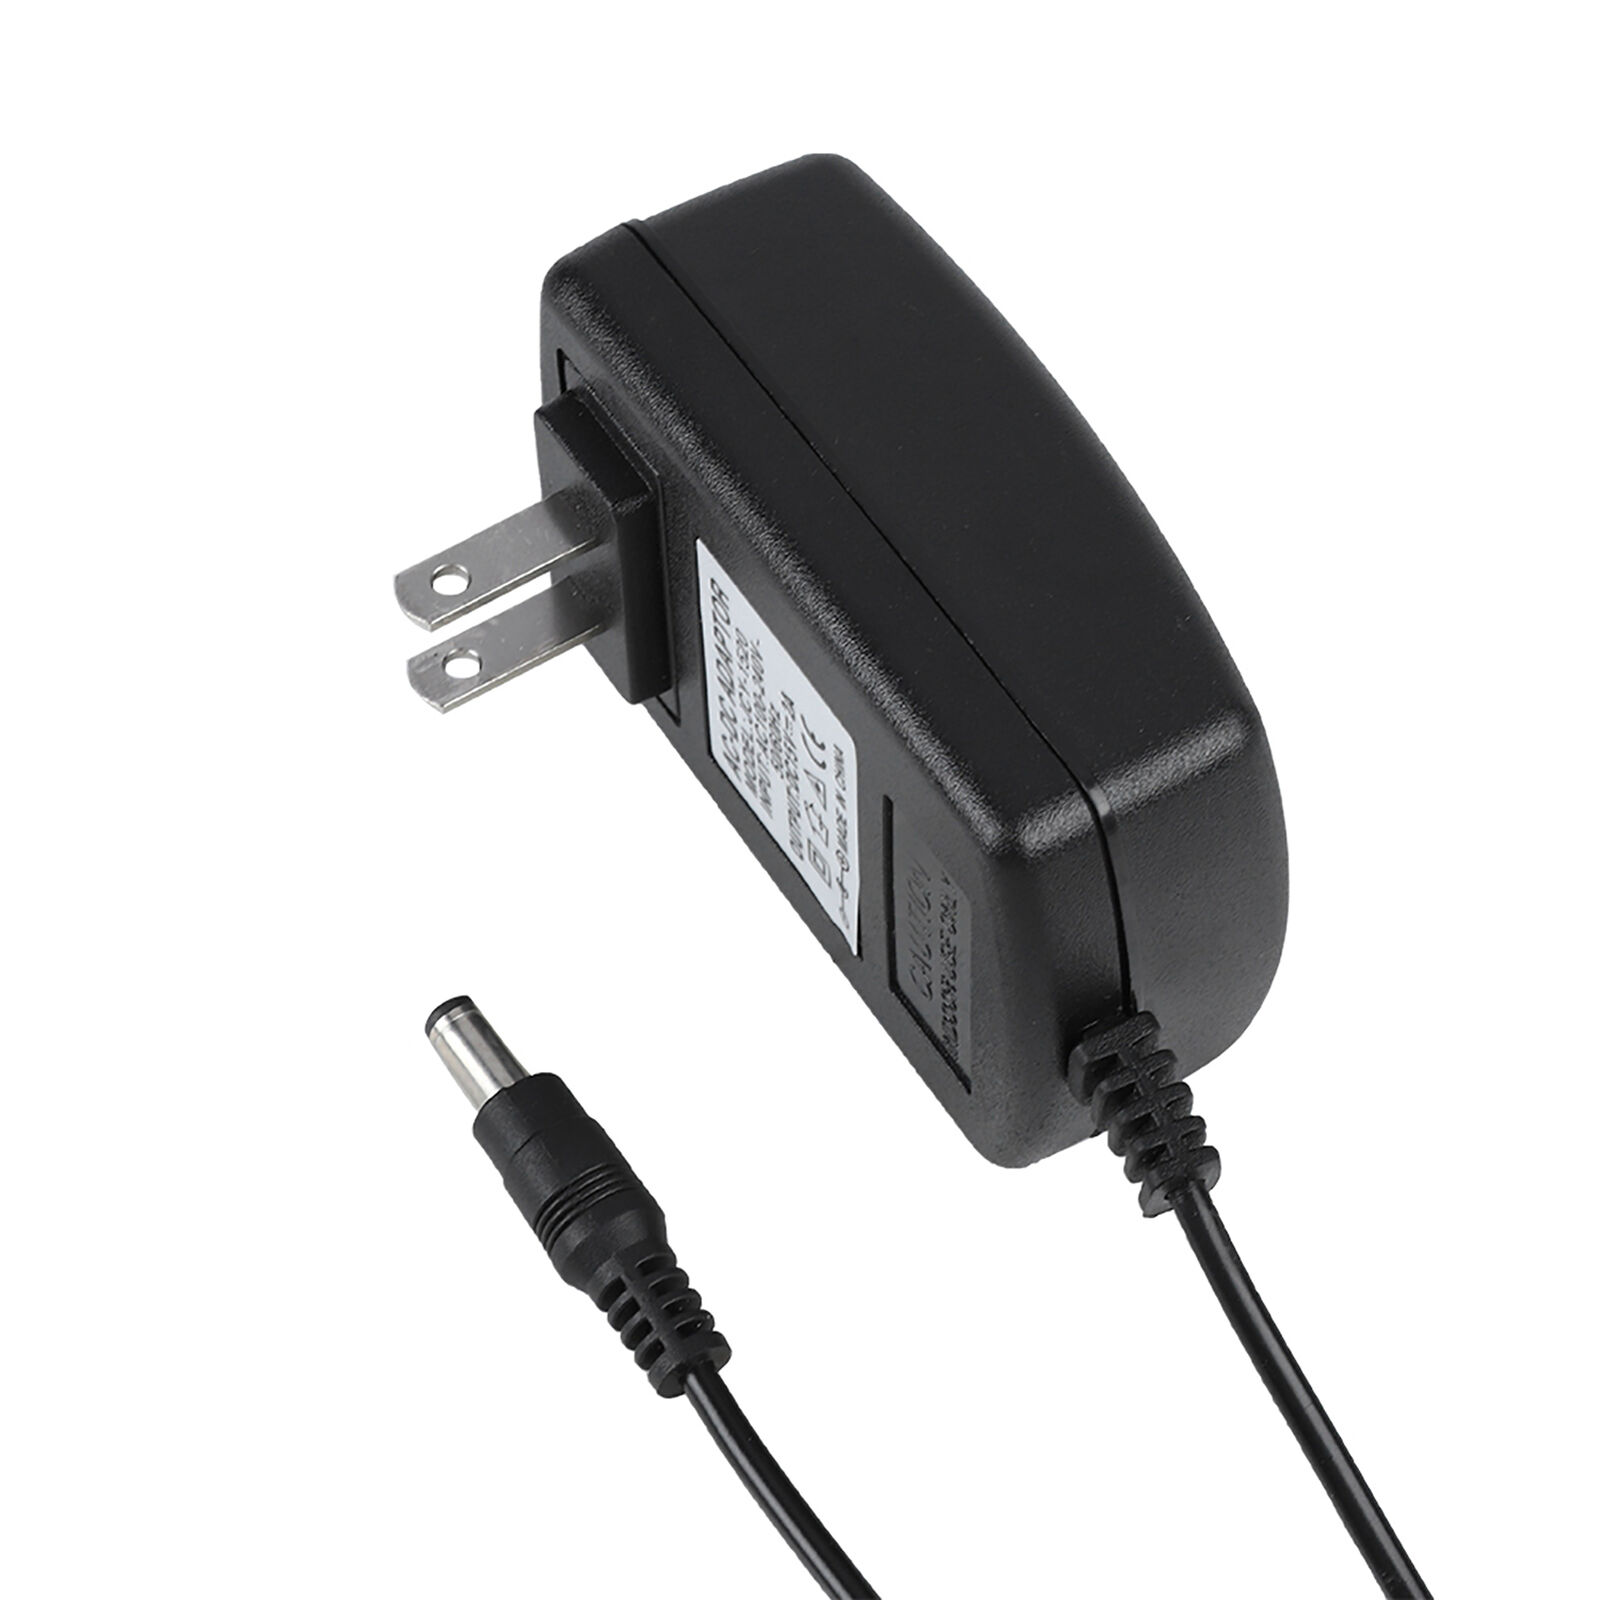 AC/DC Adapter For TONOR TW-820 Wireless Microphone Power Supply Battery Charger Specification: Worldwide Input Voltage